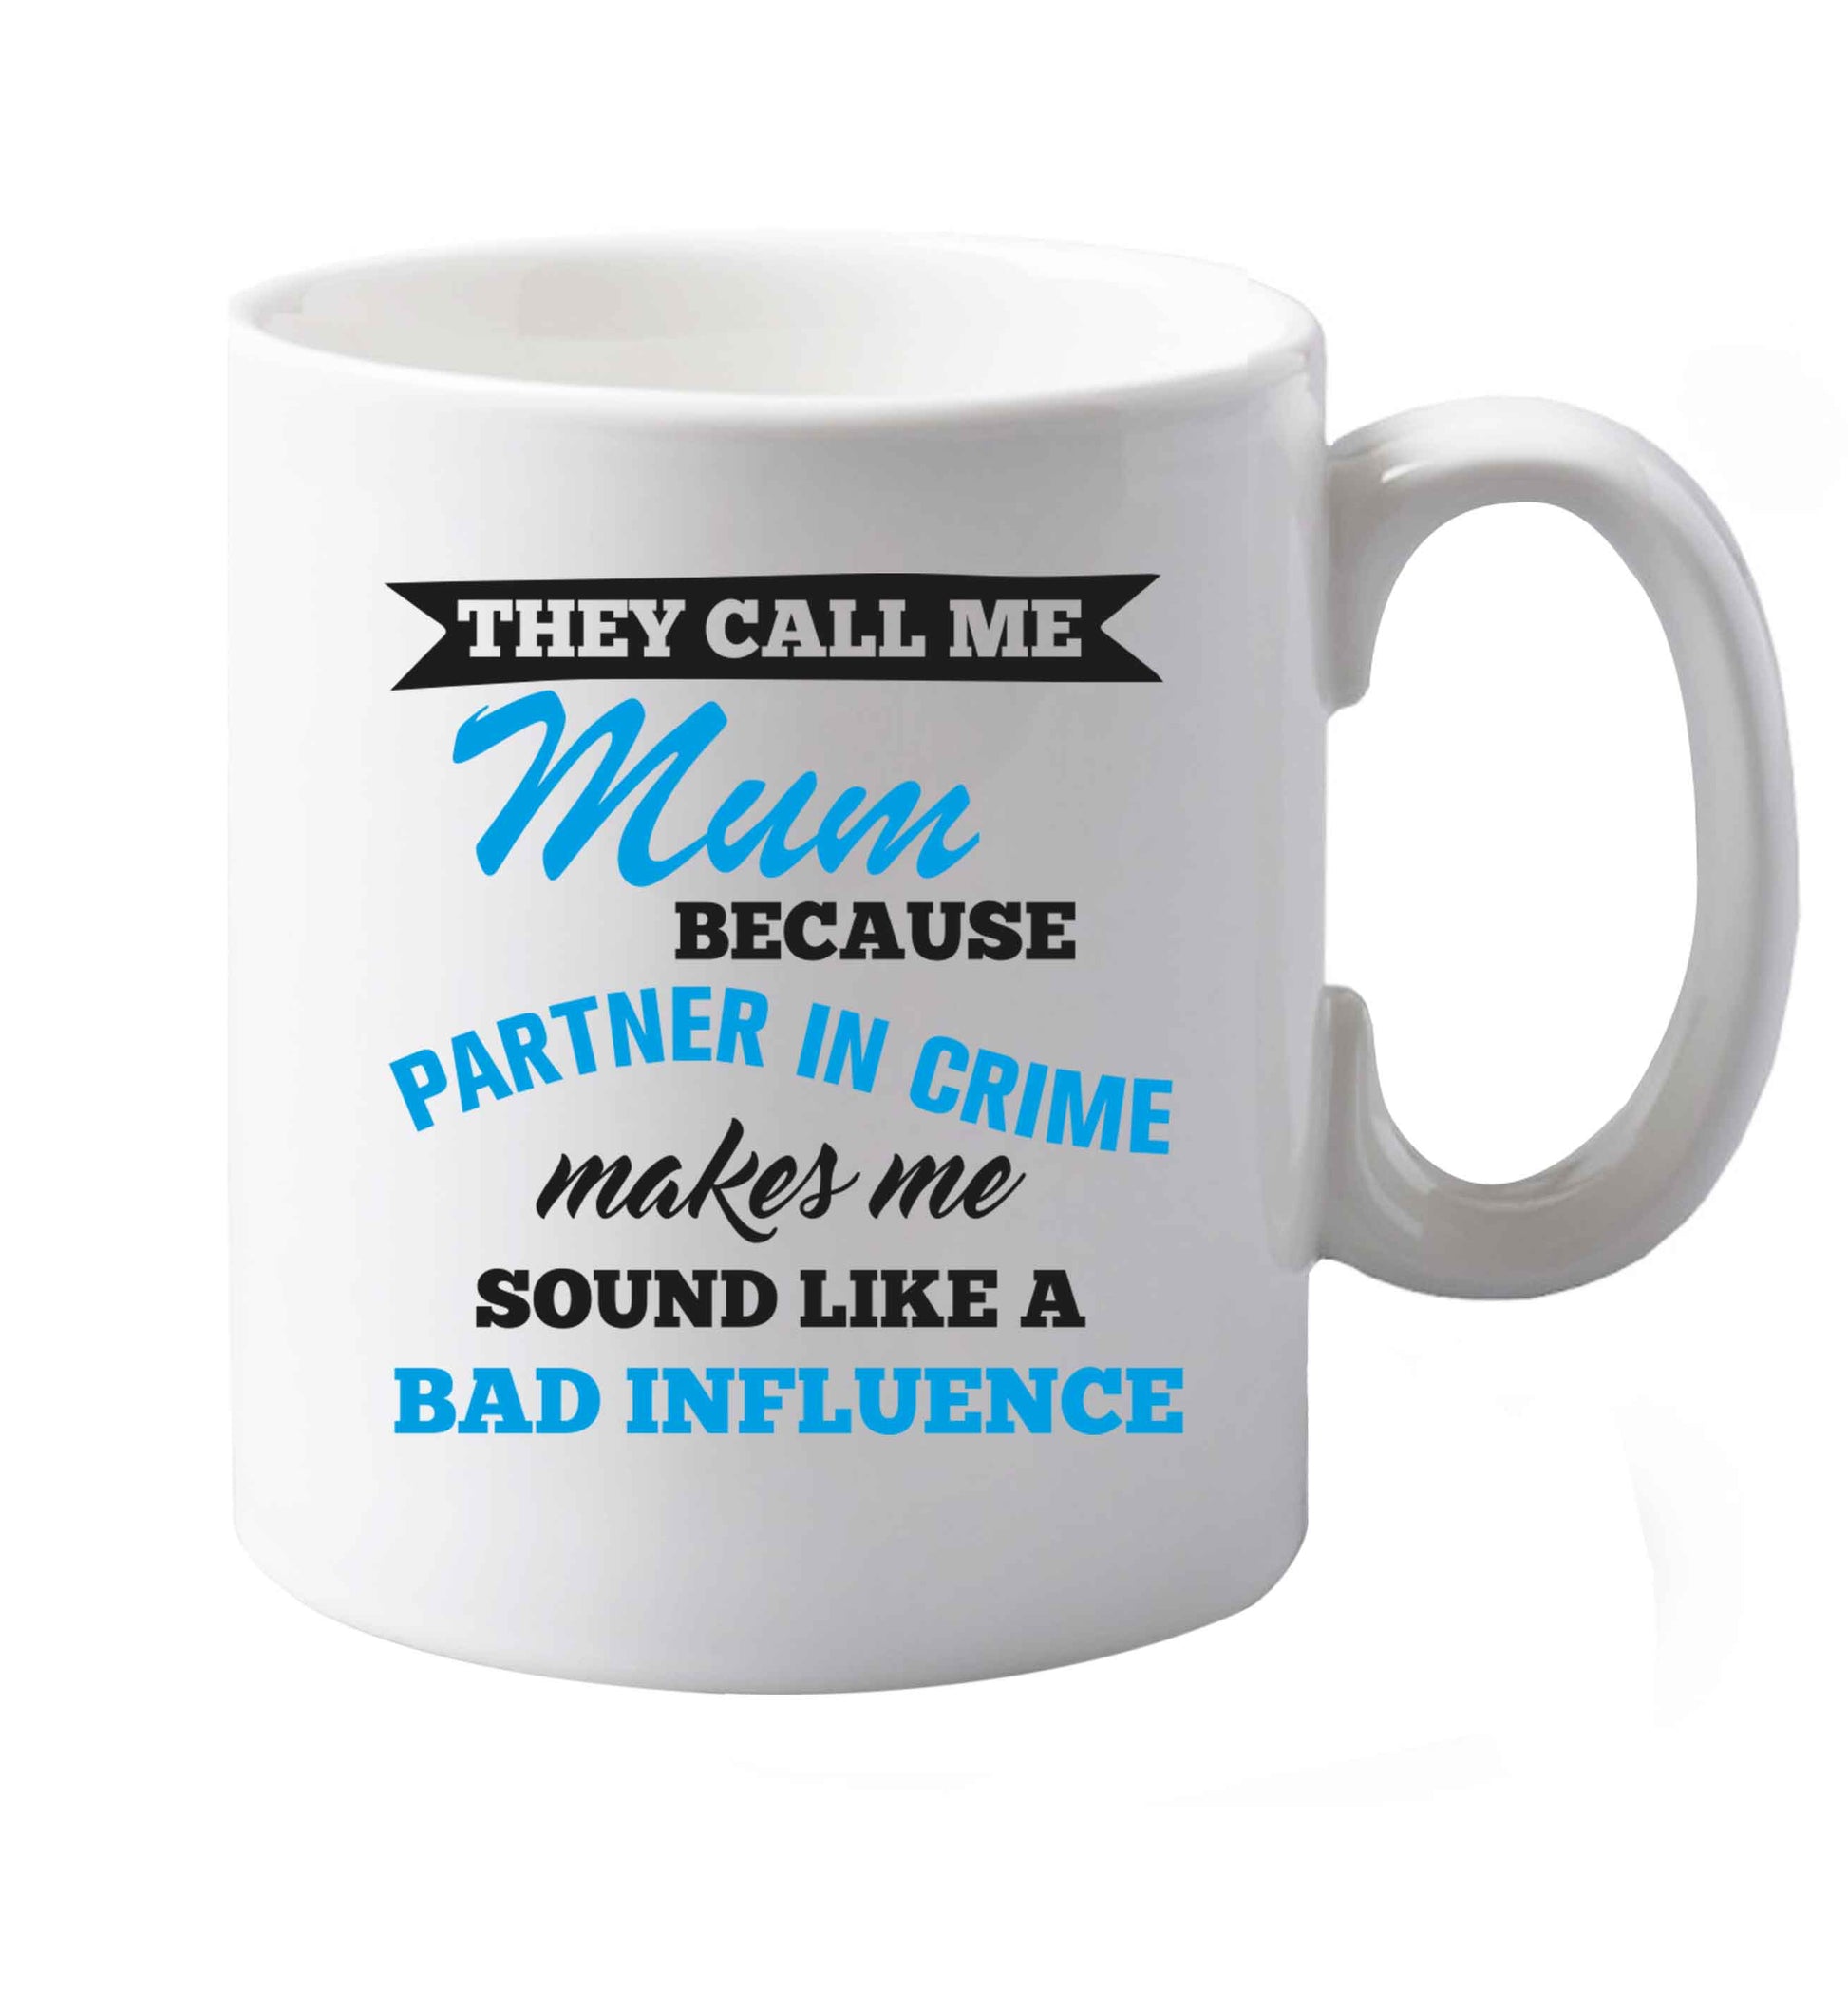 10 oz They call me mum because partner in crime makes me sound like a bad influence ceramic mug both sides